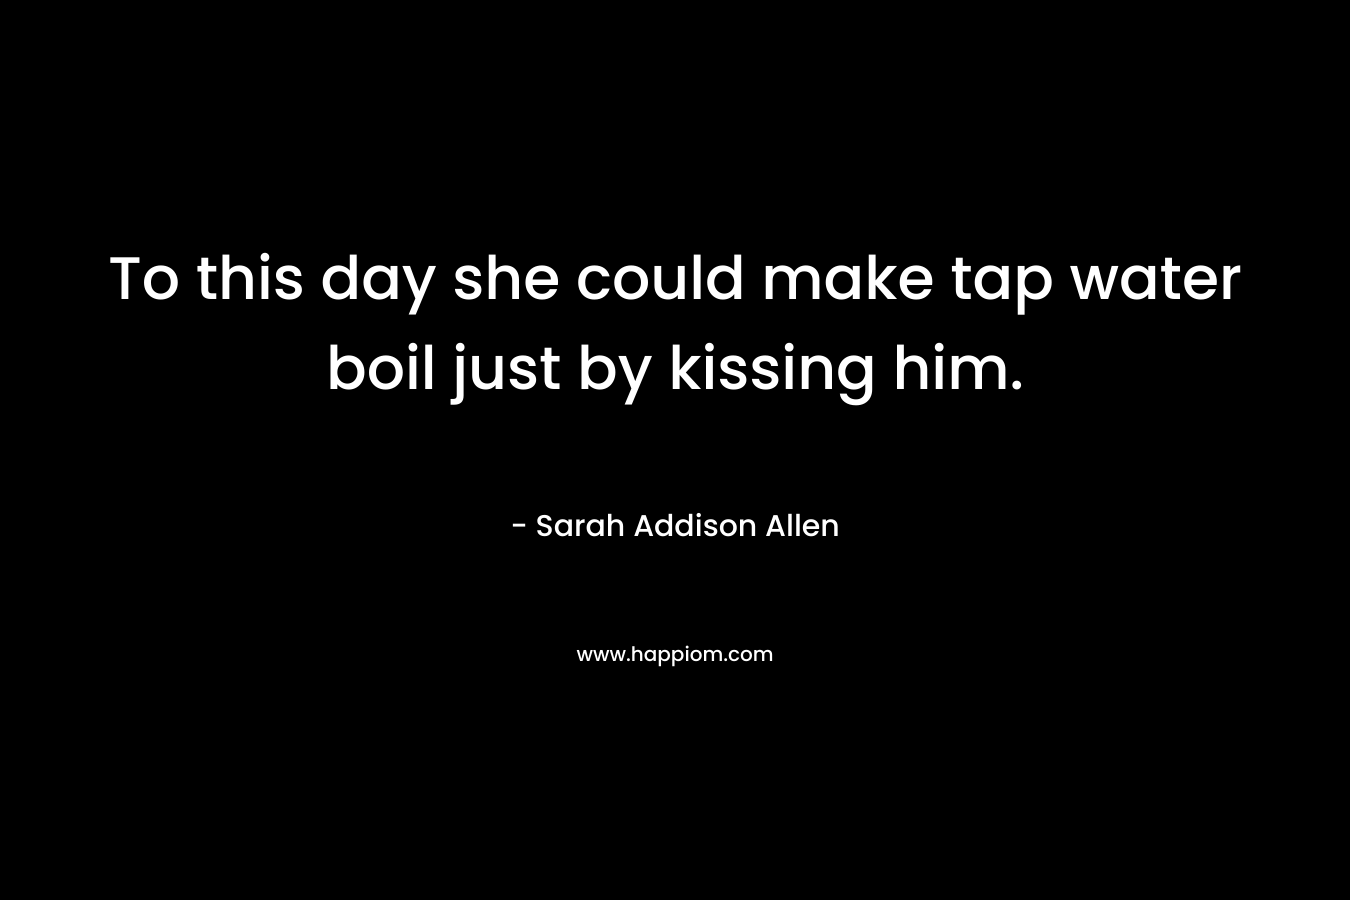 To this day she could make tap water boil just by kissing him. – Sarah Addison Allen